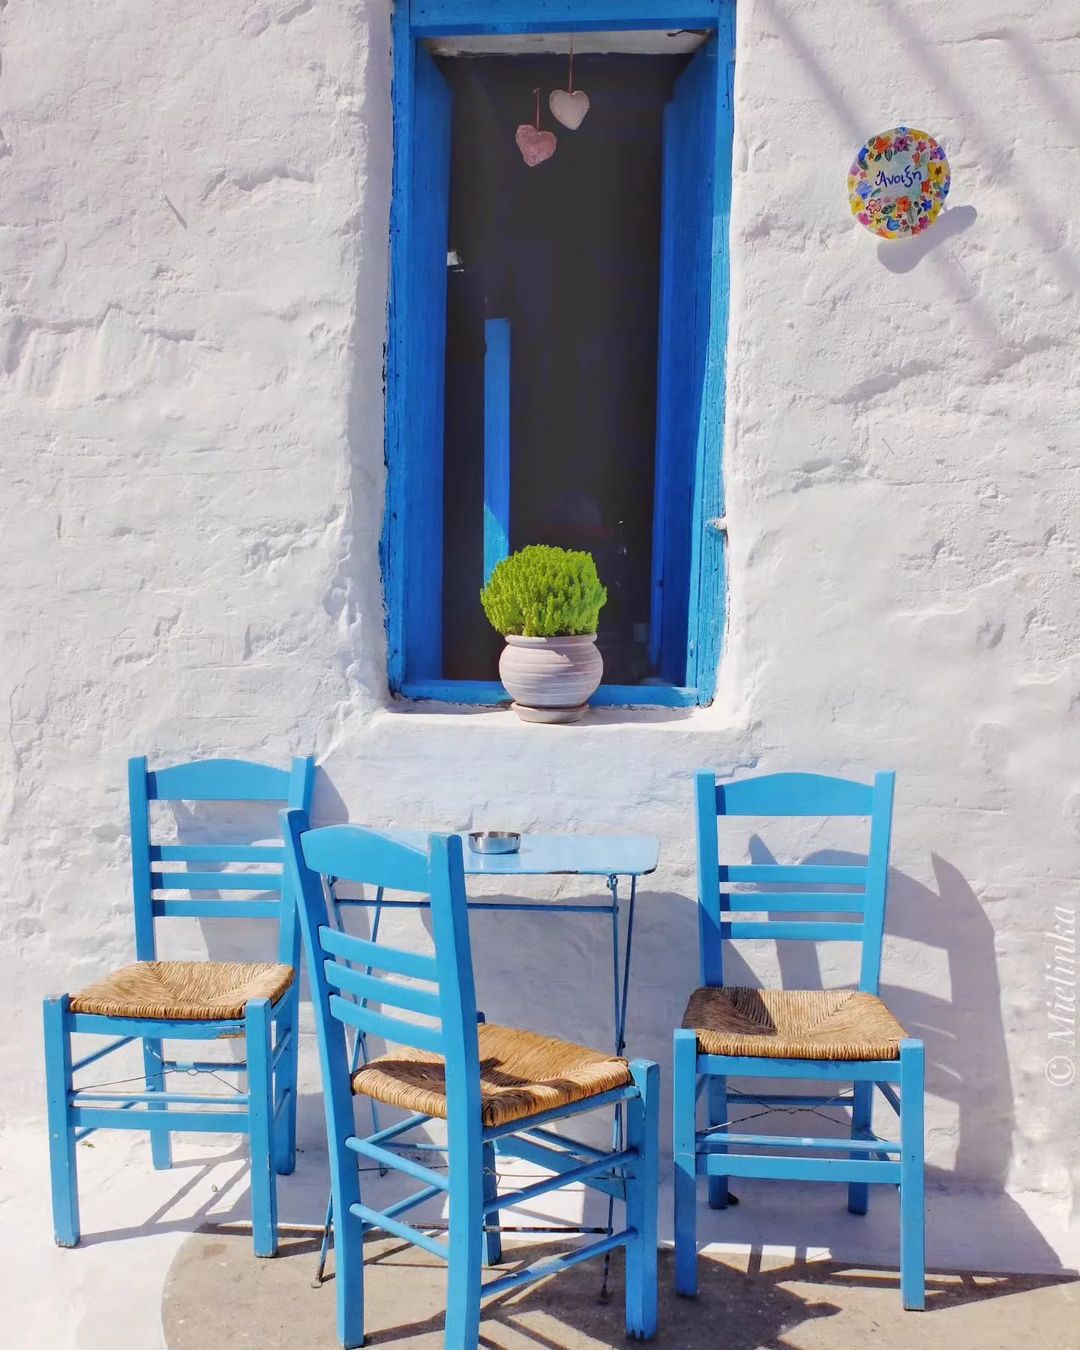 Schinoussa: Discovering the tranquility of the Cyclades Islands